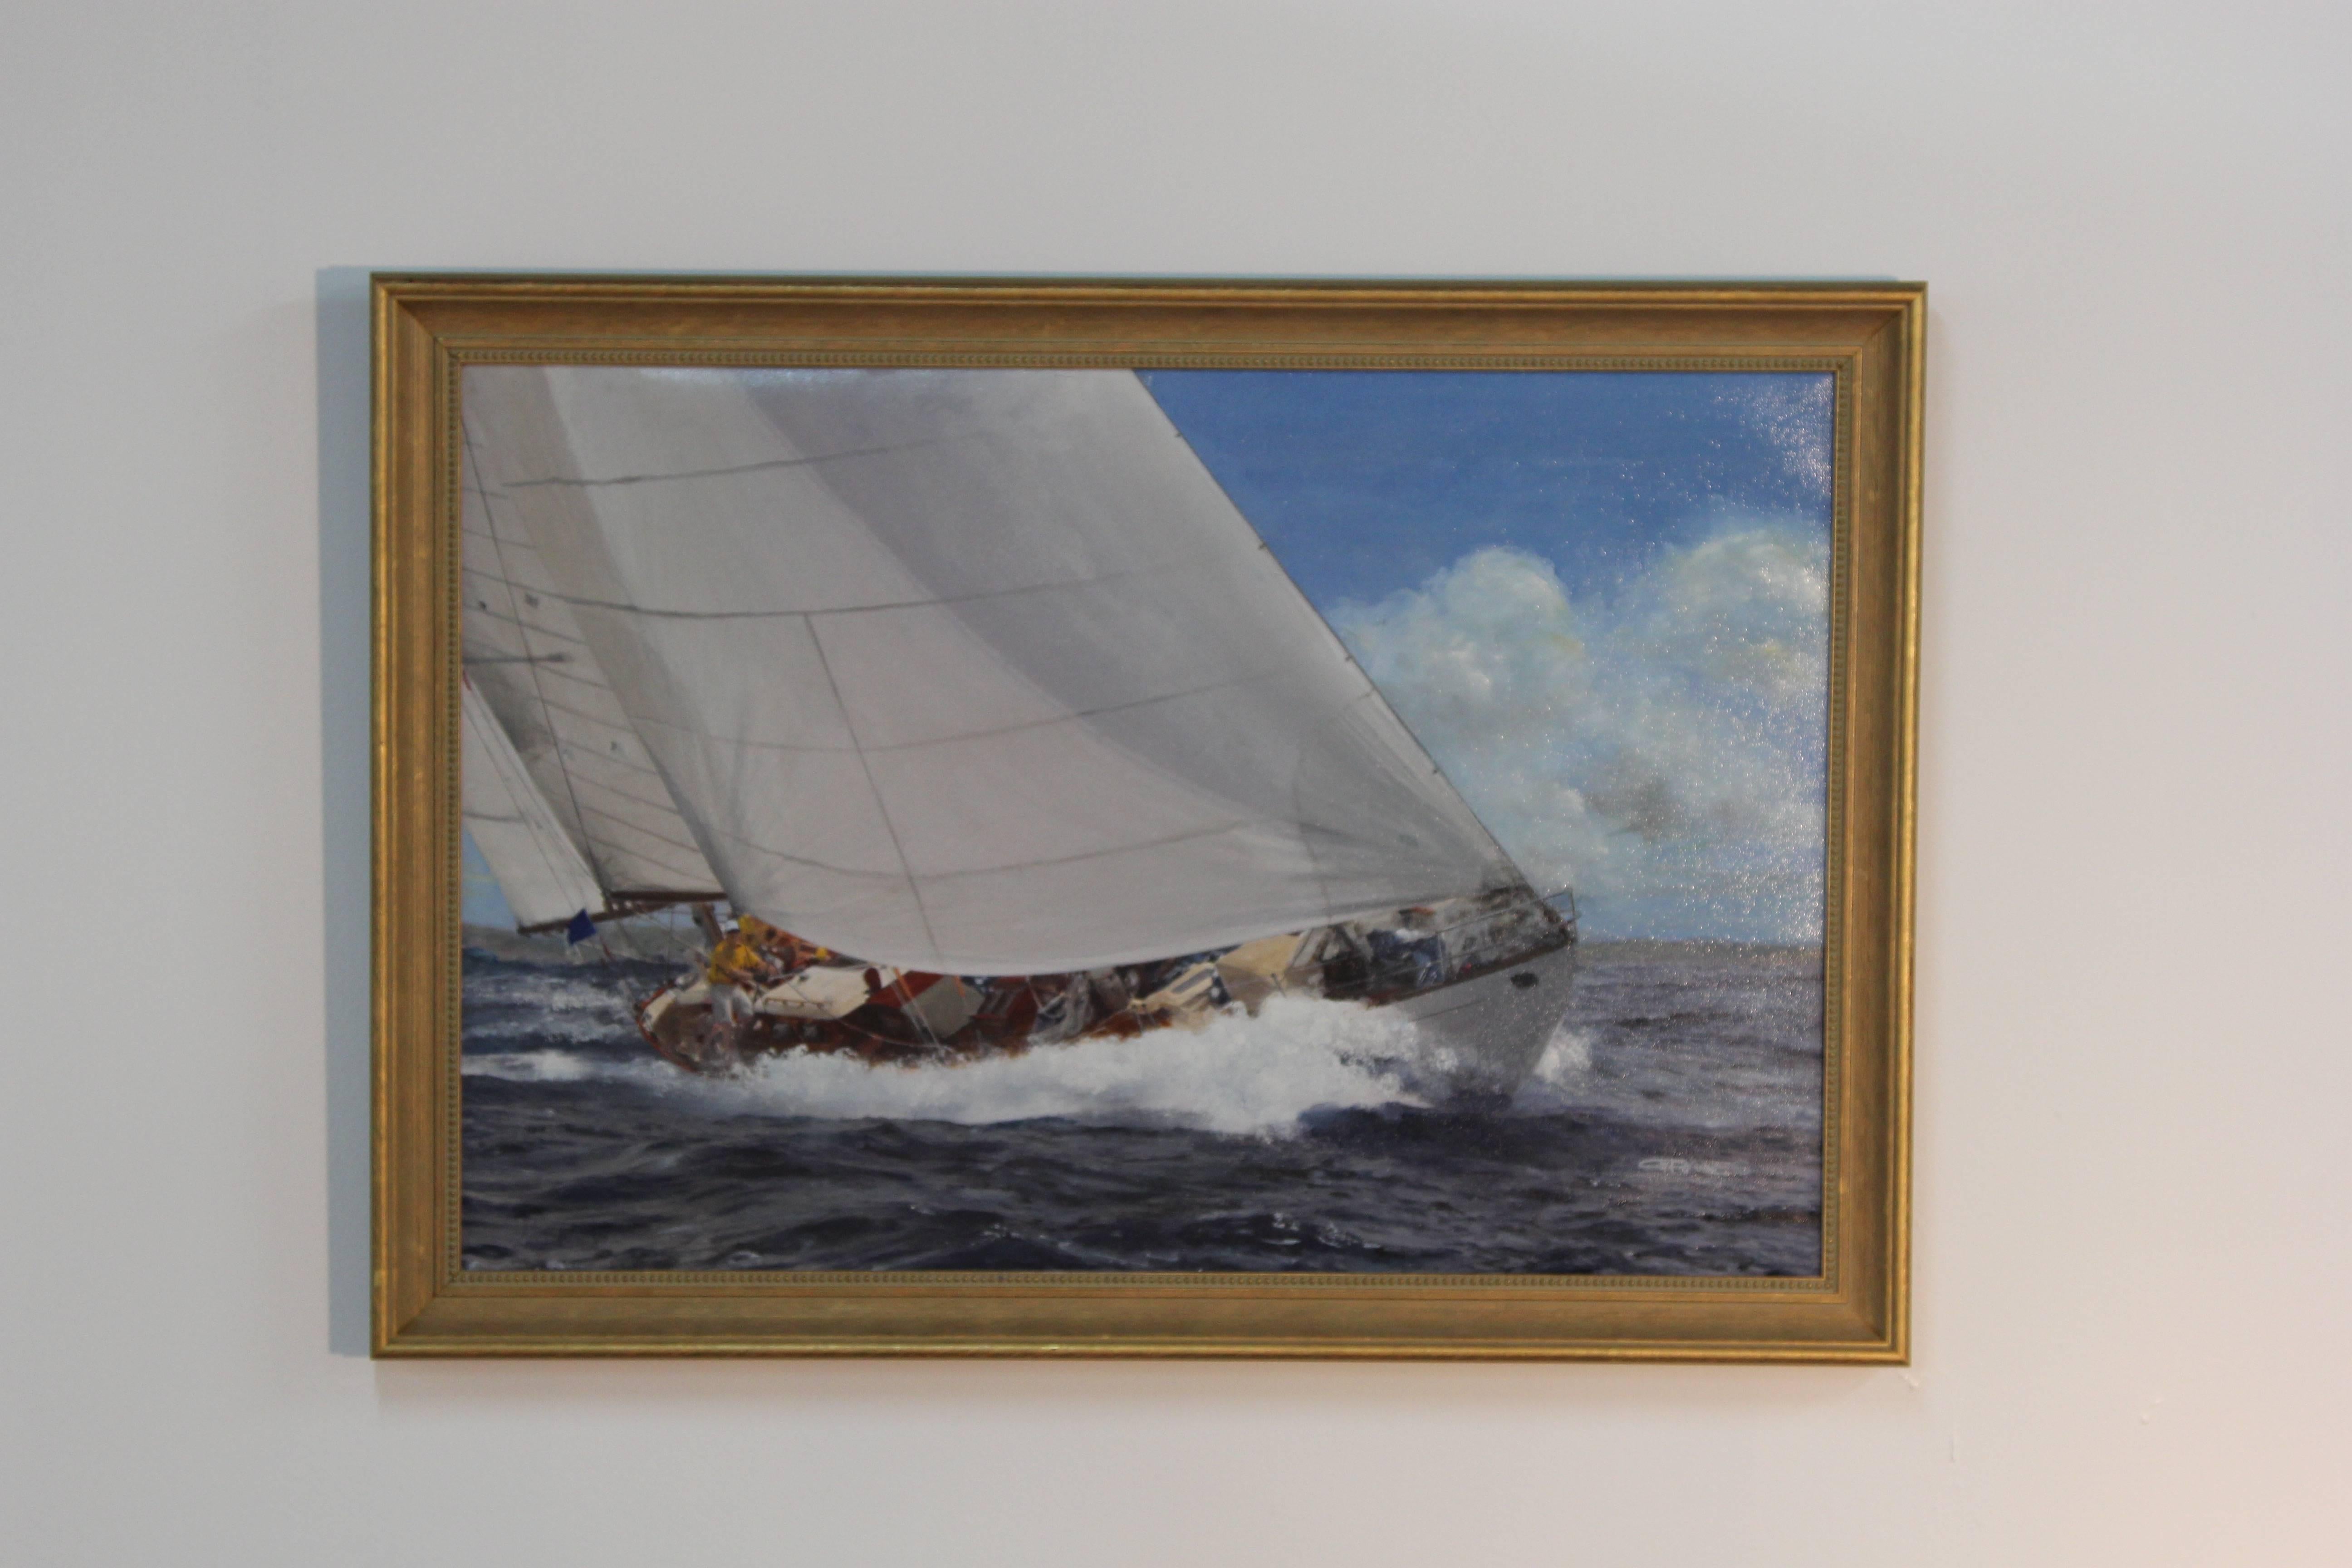 Measures: 20”x30” framed oil on canvas painting of yacht racing in Antigua Race Week.

Mary Rose,
A 64.5 foot yacht designed by Nathaniel G. Herreschoff an American naval architect, mechanical engineer, and yacht design innovator in 1925.
The